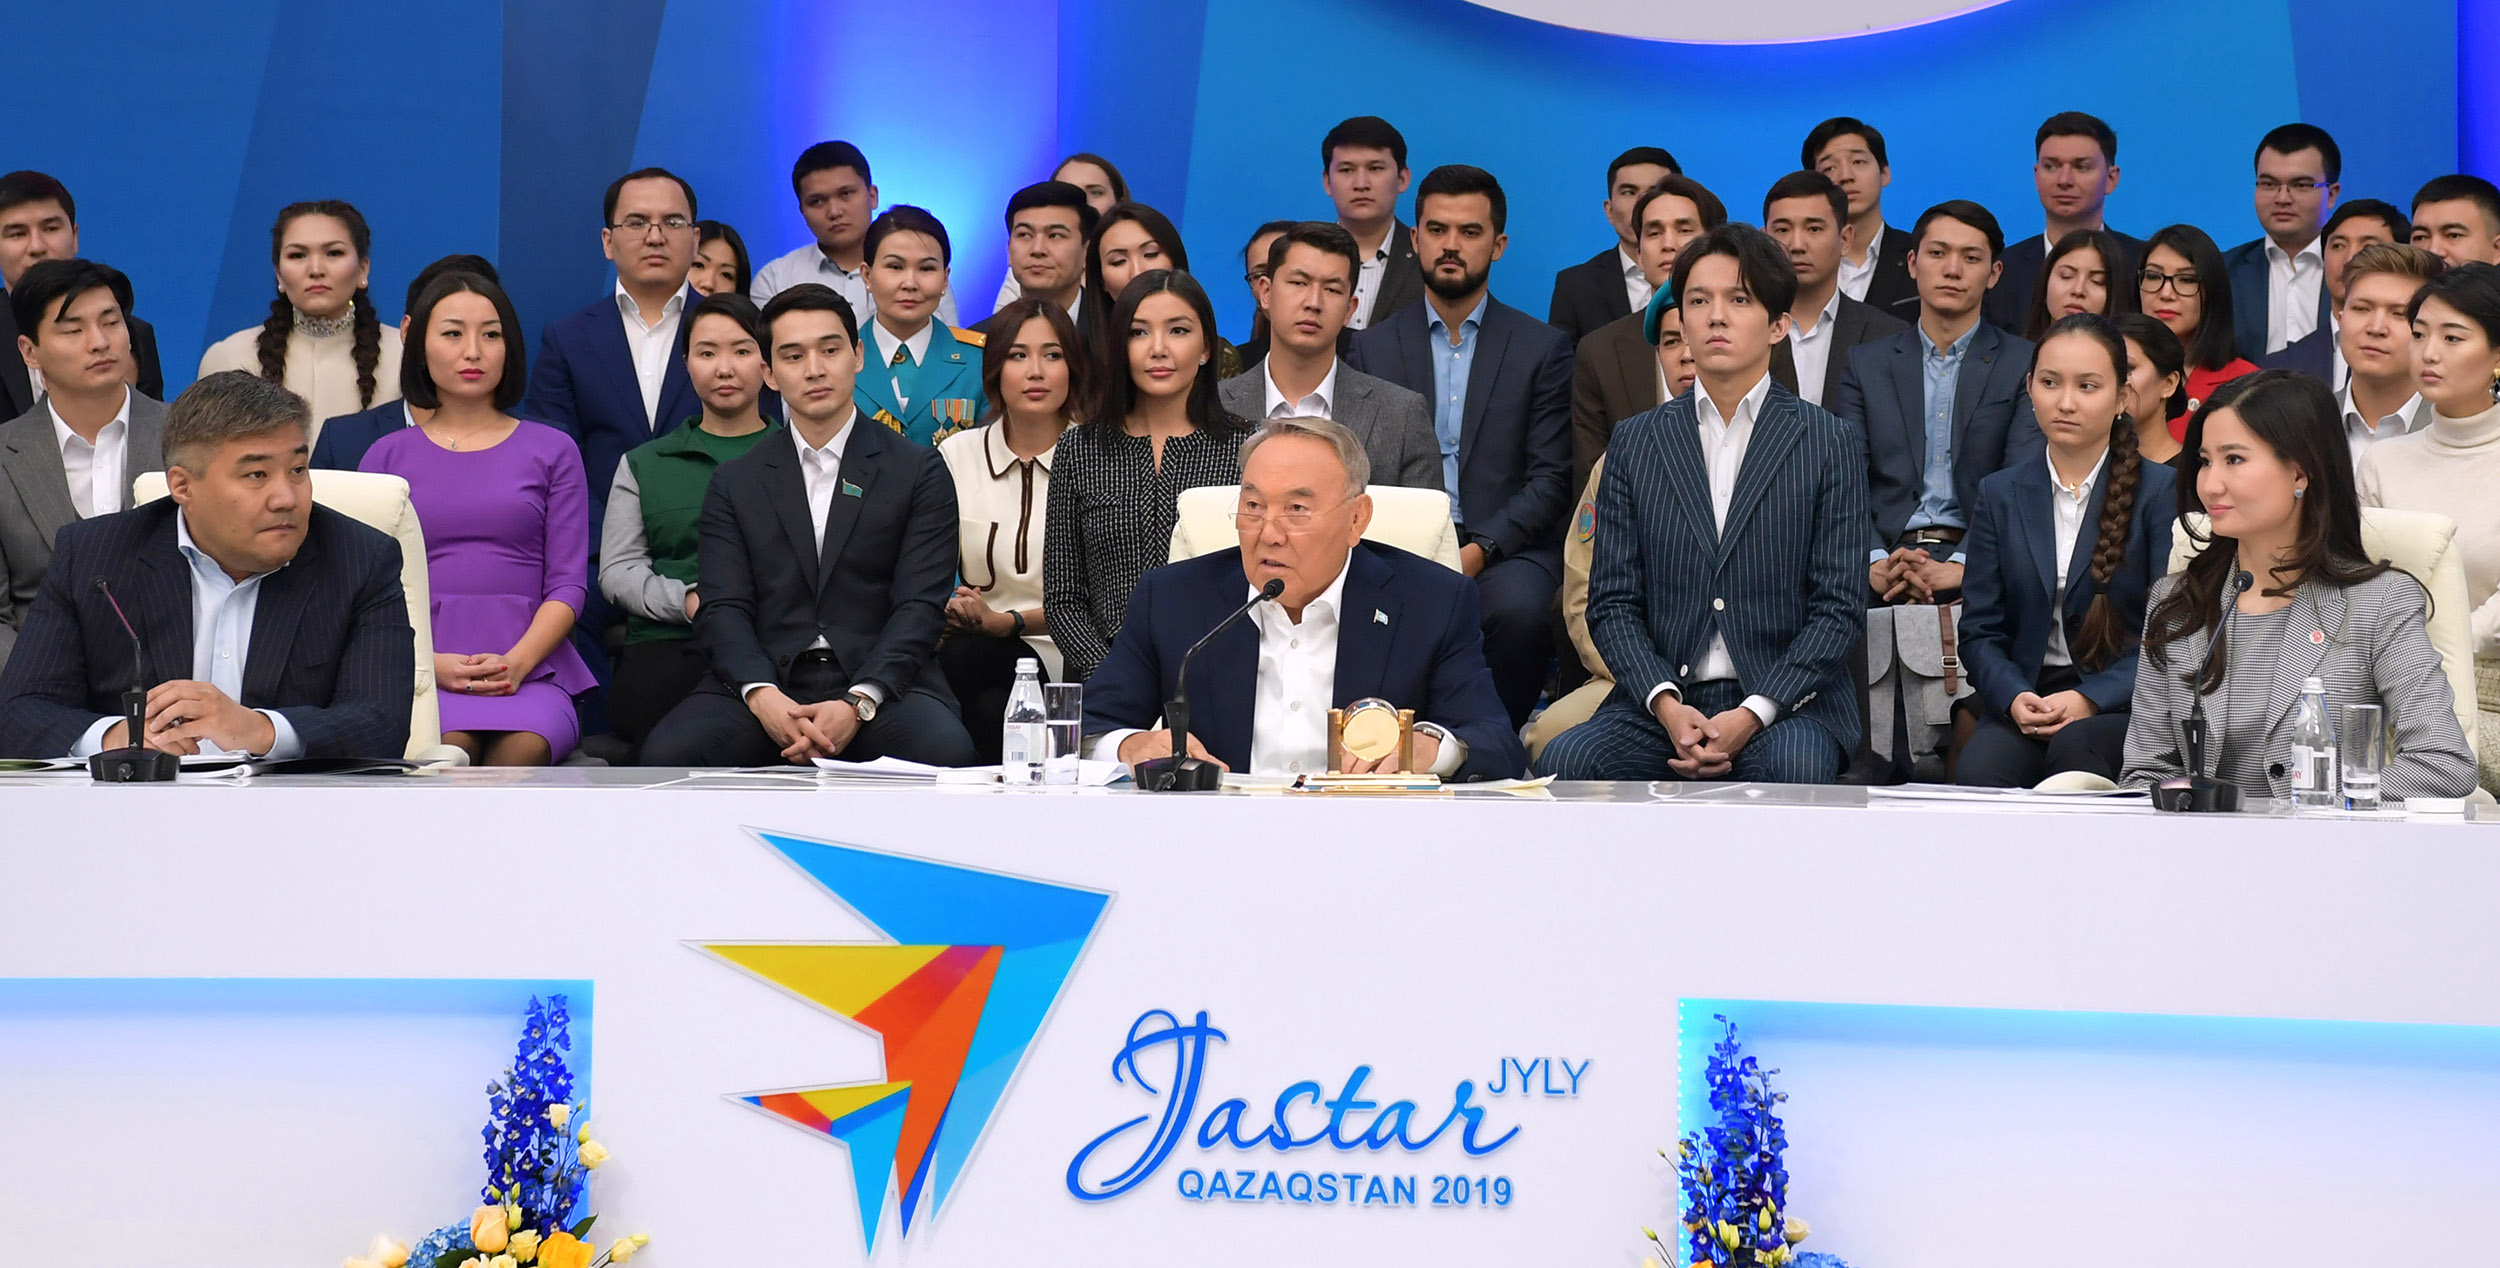 Kazakh President participates in the opening ceremony of the Year of Youth